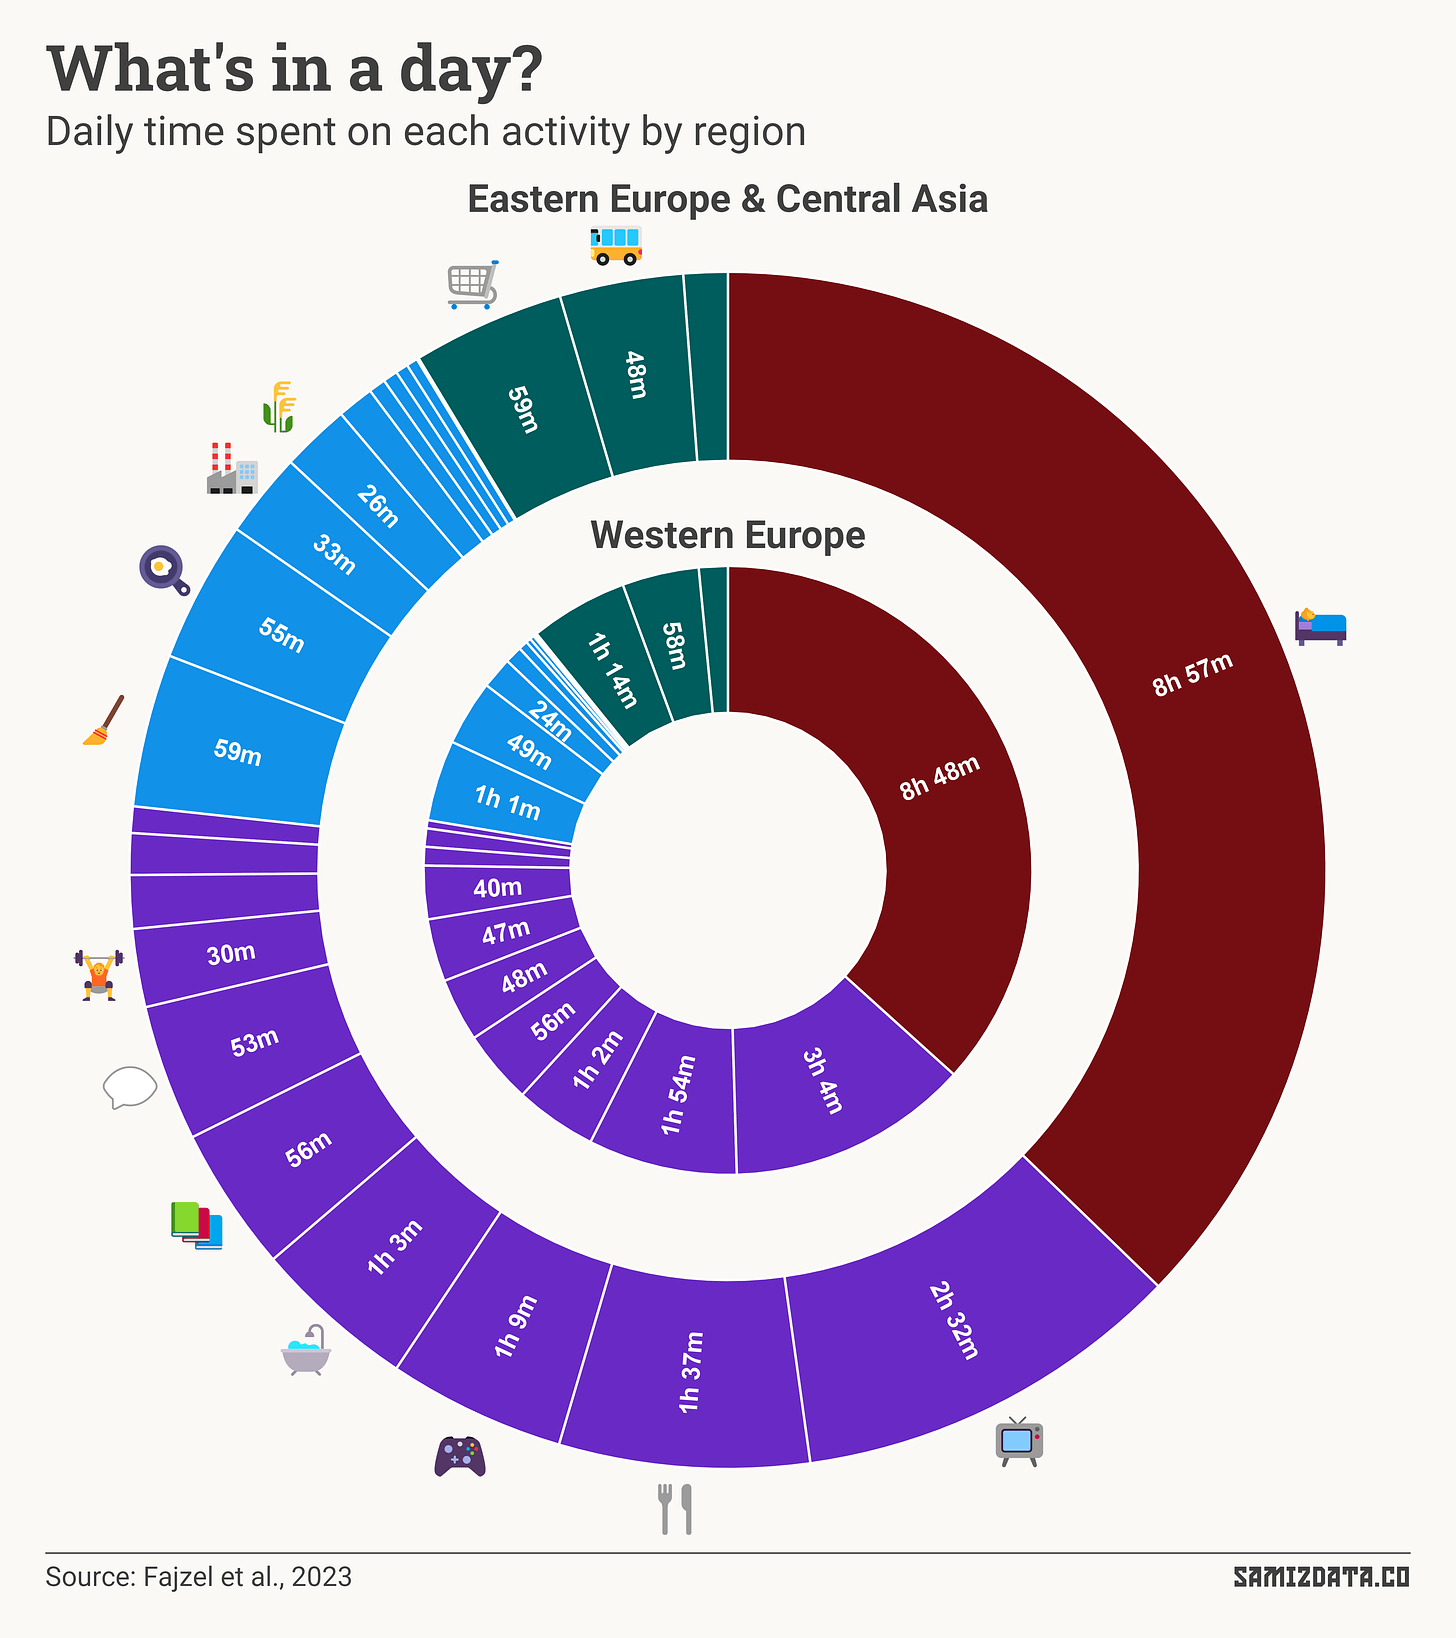 A donut showing the daily time spent on each activity in both Eastern Europe and Central Asia, as well as Western Europe. The chart reveals the distribution of time spent on different activities in the two regions, highlighting differences in daily routines.